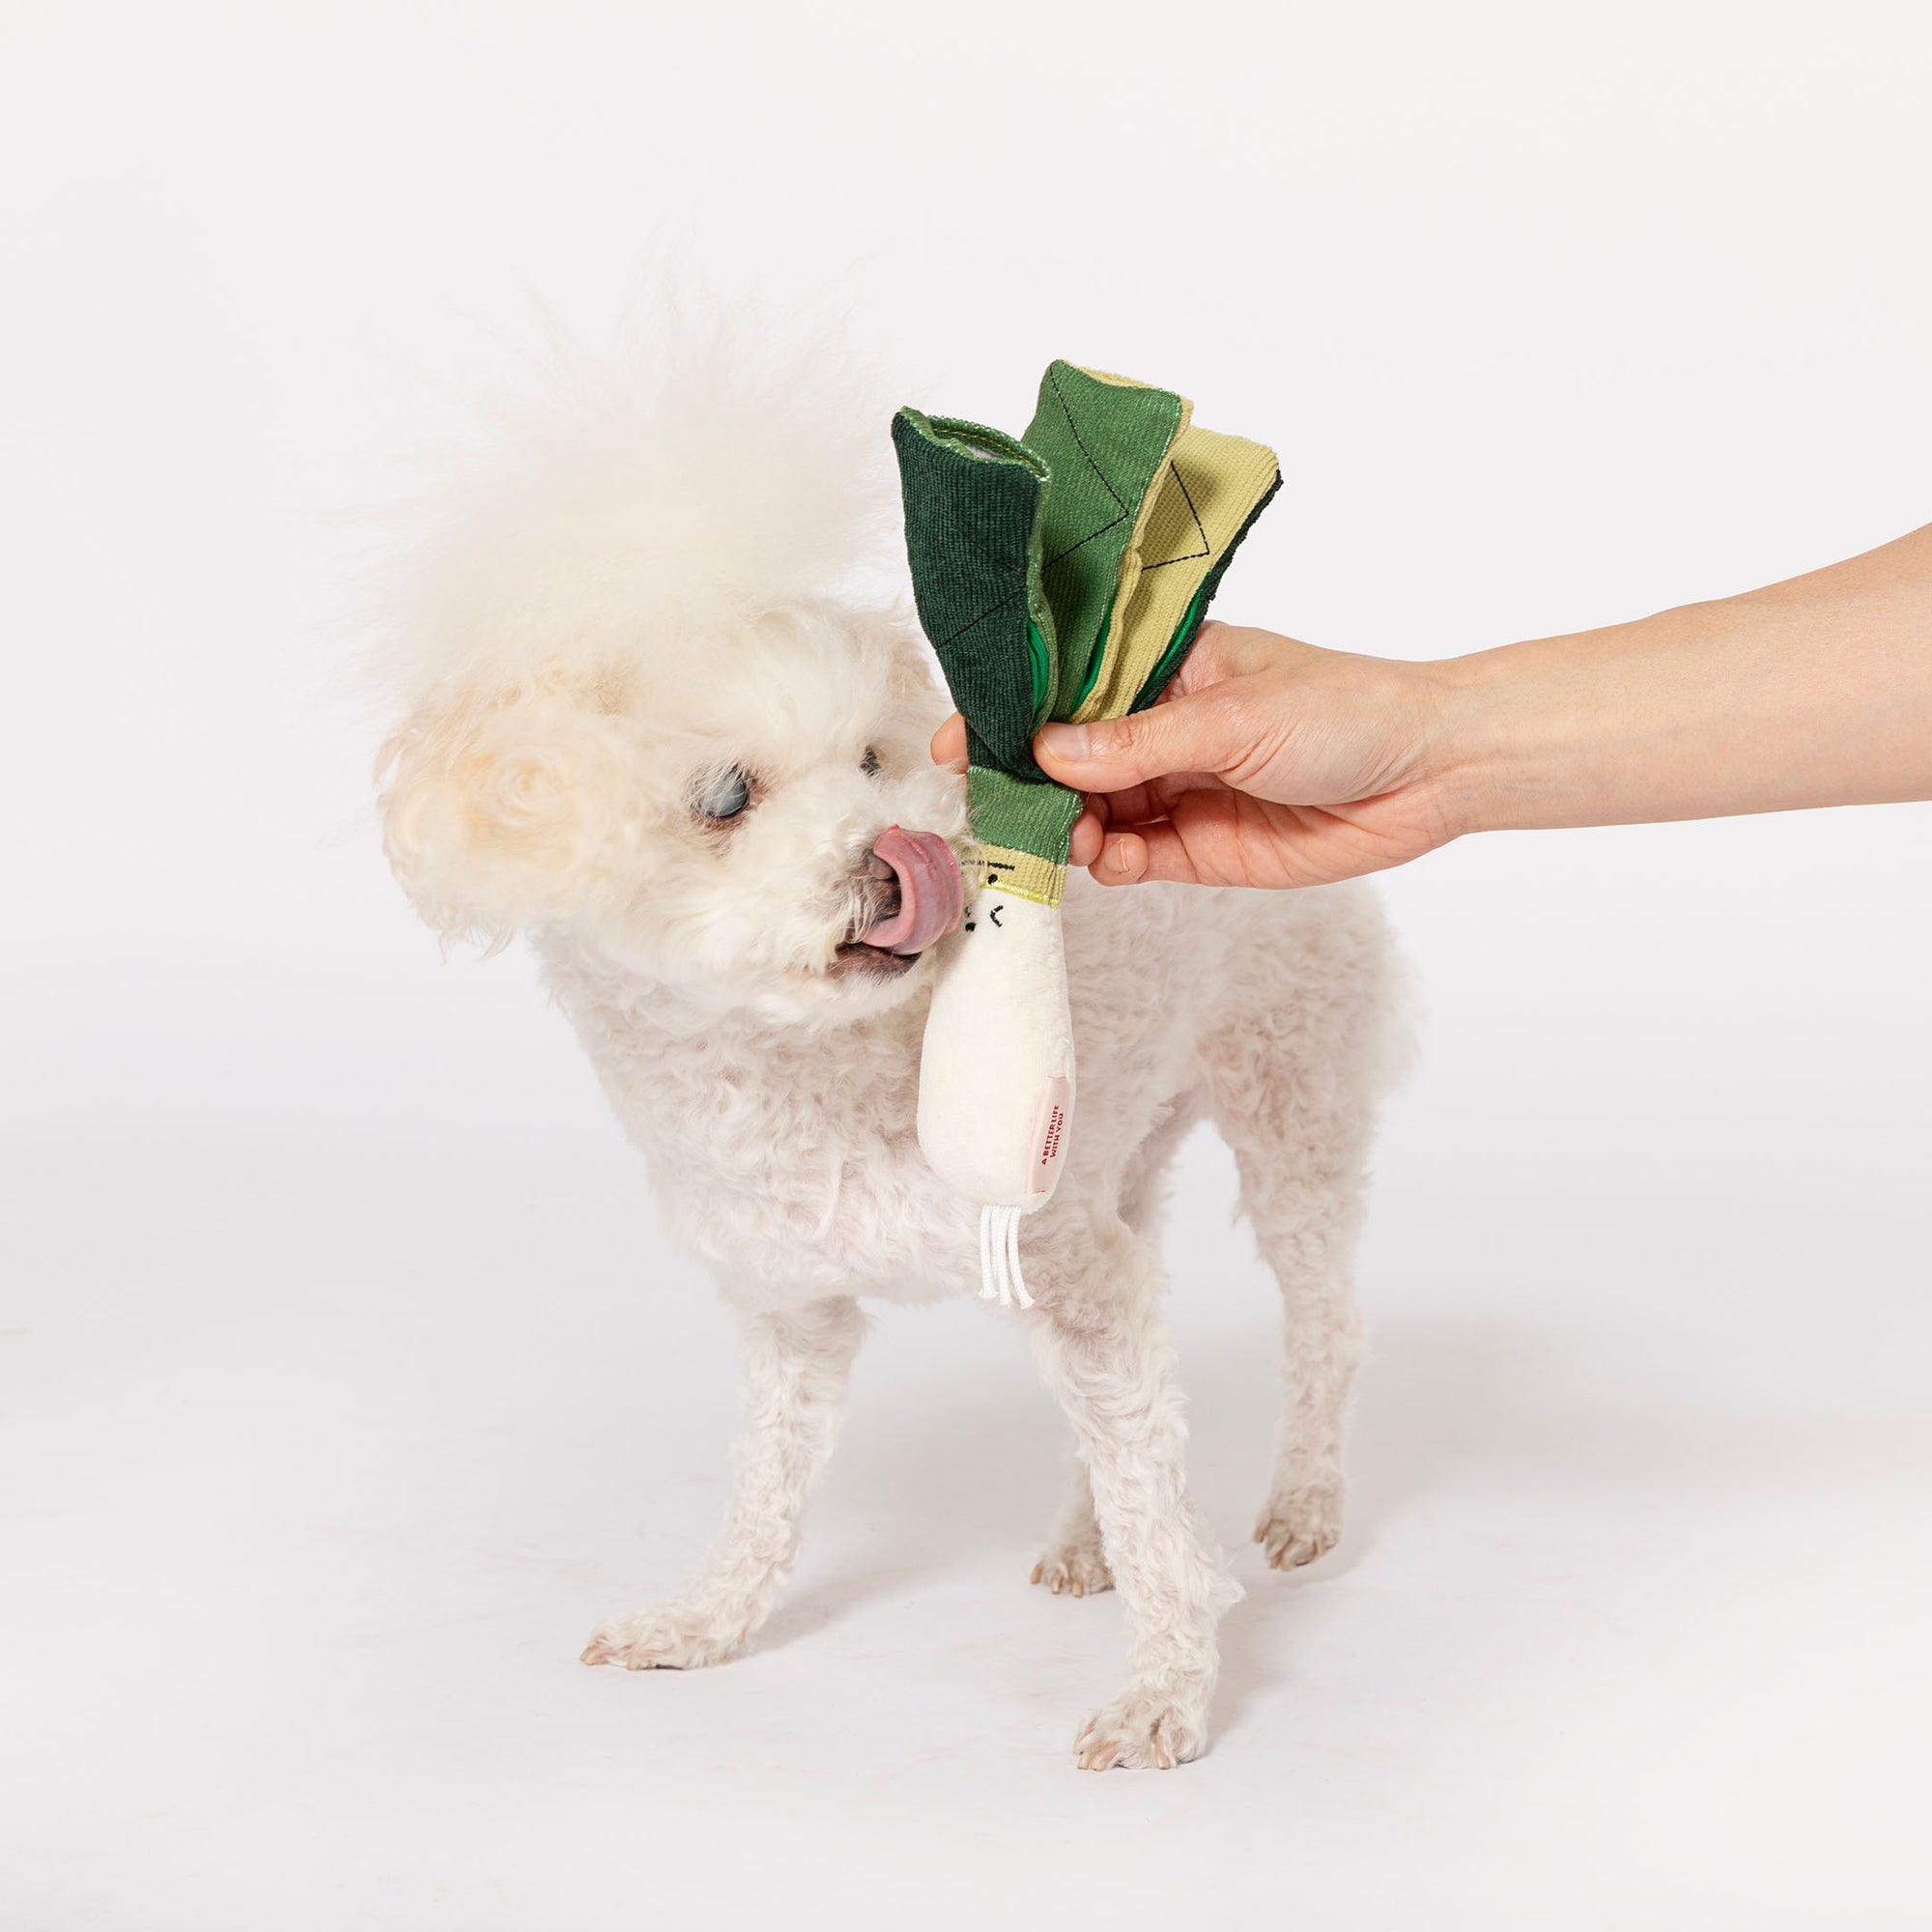 a white poodle with fluffy fur, playfully biting and licking a green onion-shaped dog toy being offered by someone's hand. The dog's attention is fixated on the toy, indicating a moment of interaction and playful engagement typical of scent work and cognitive play sessions with pets